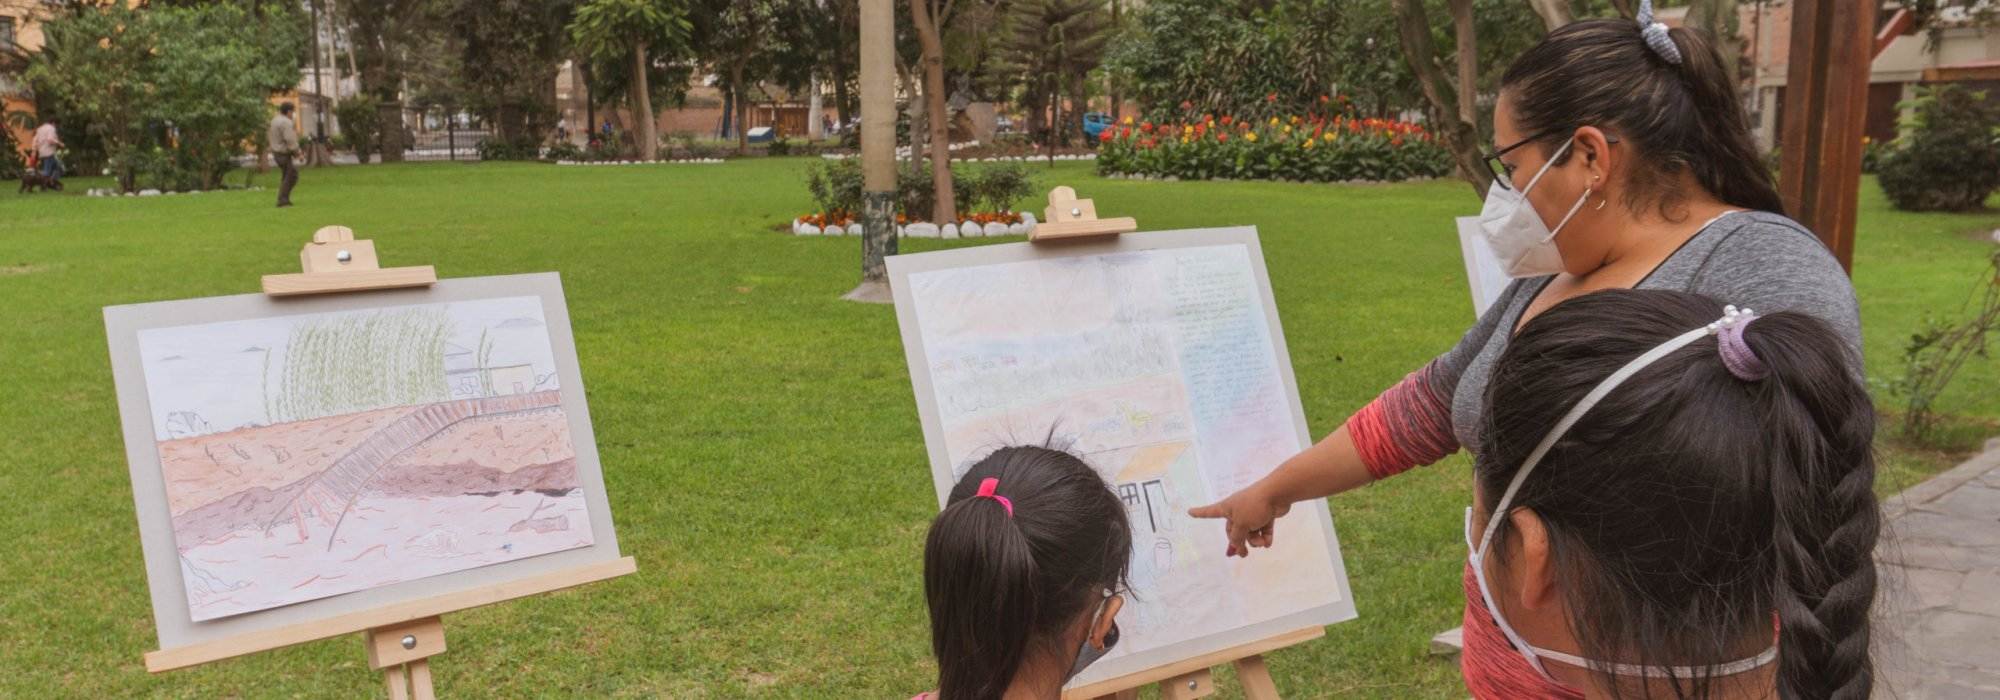 Peruvian lady looking at art work with two young artists